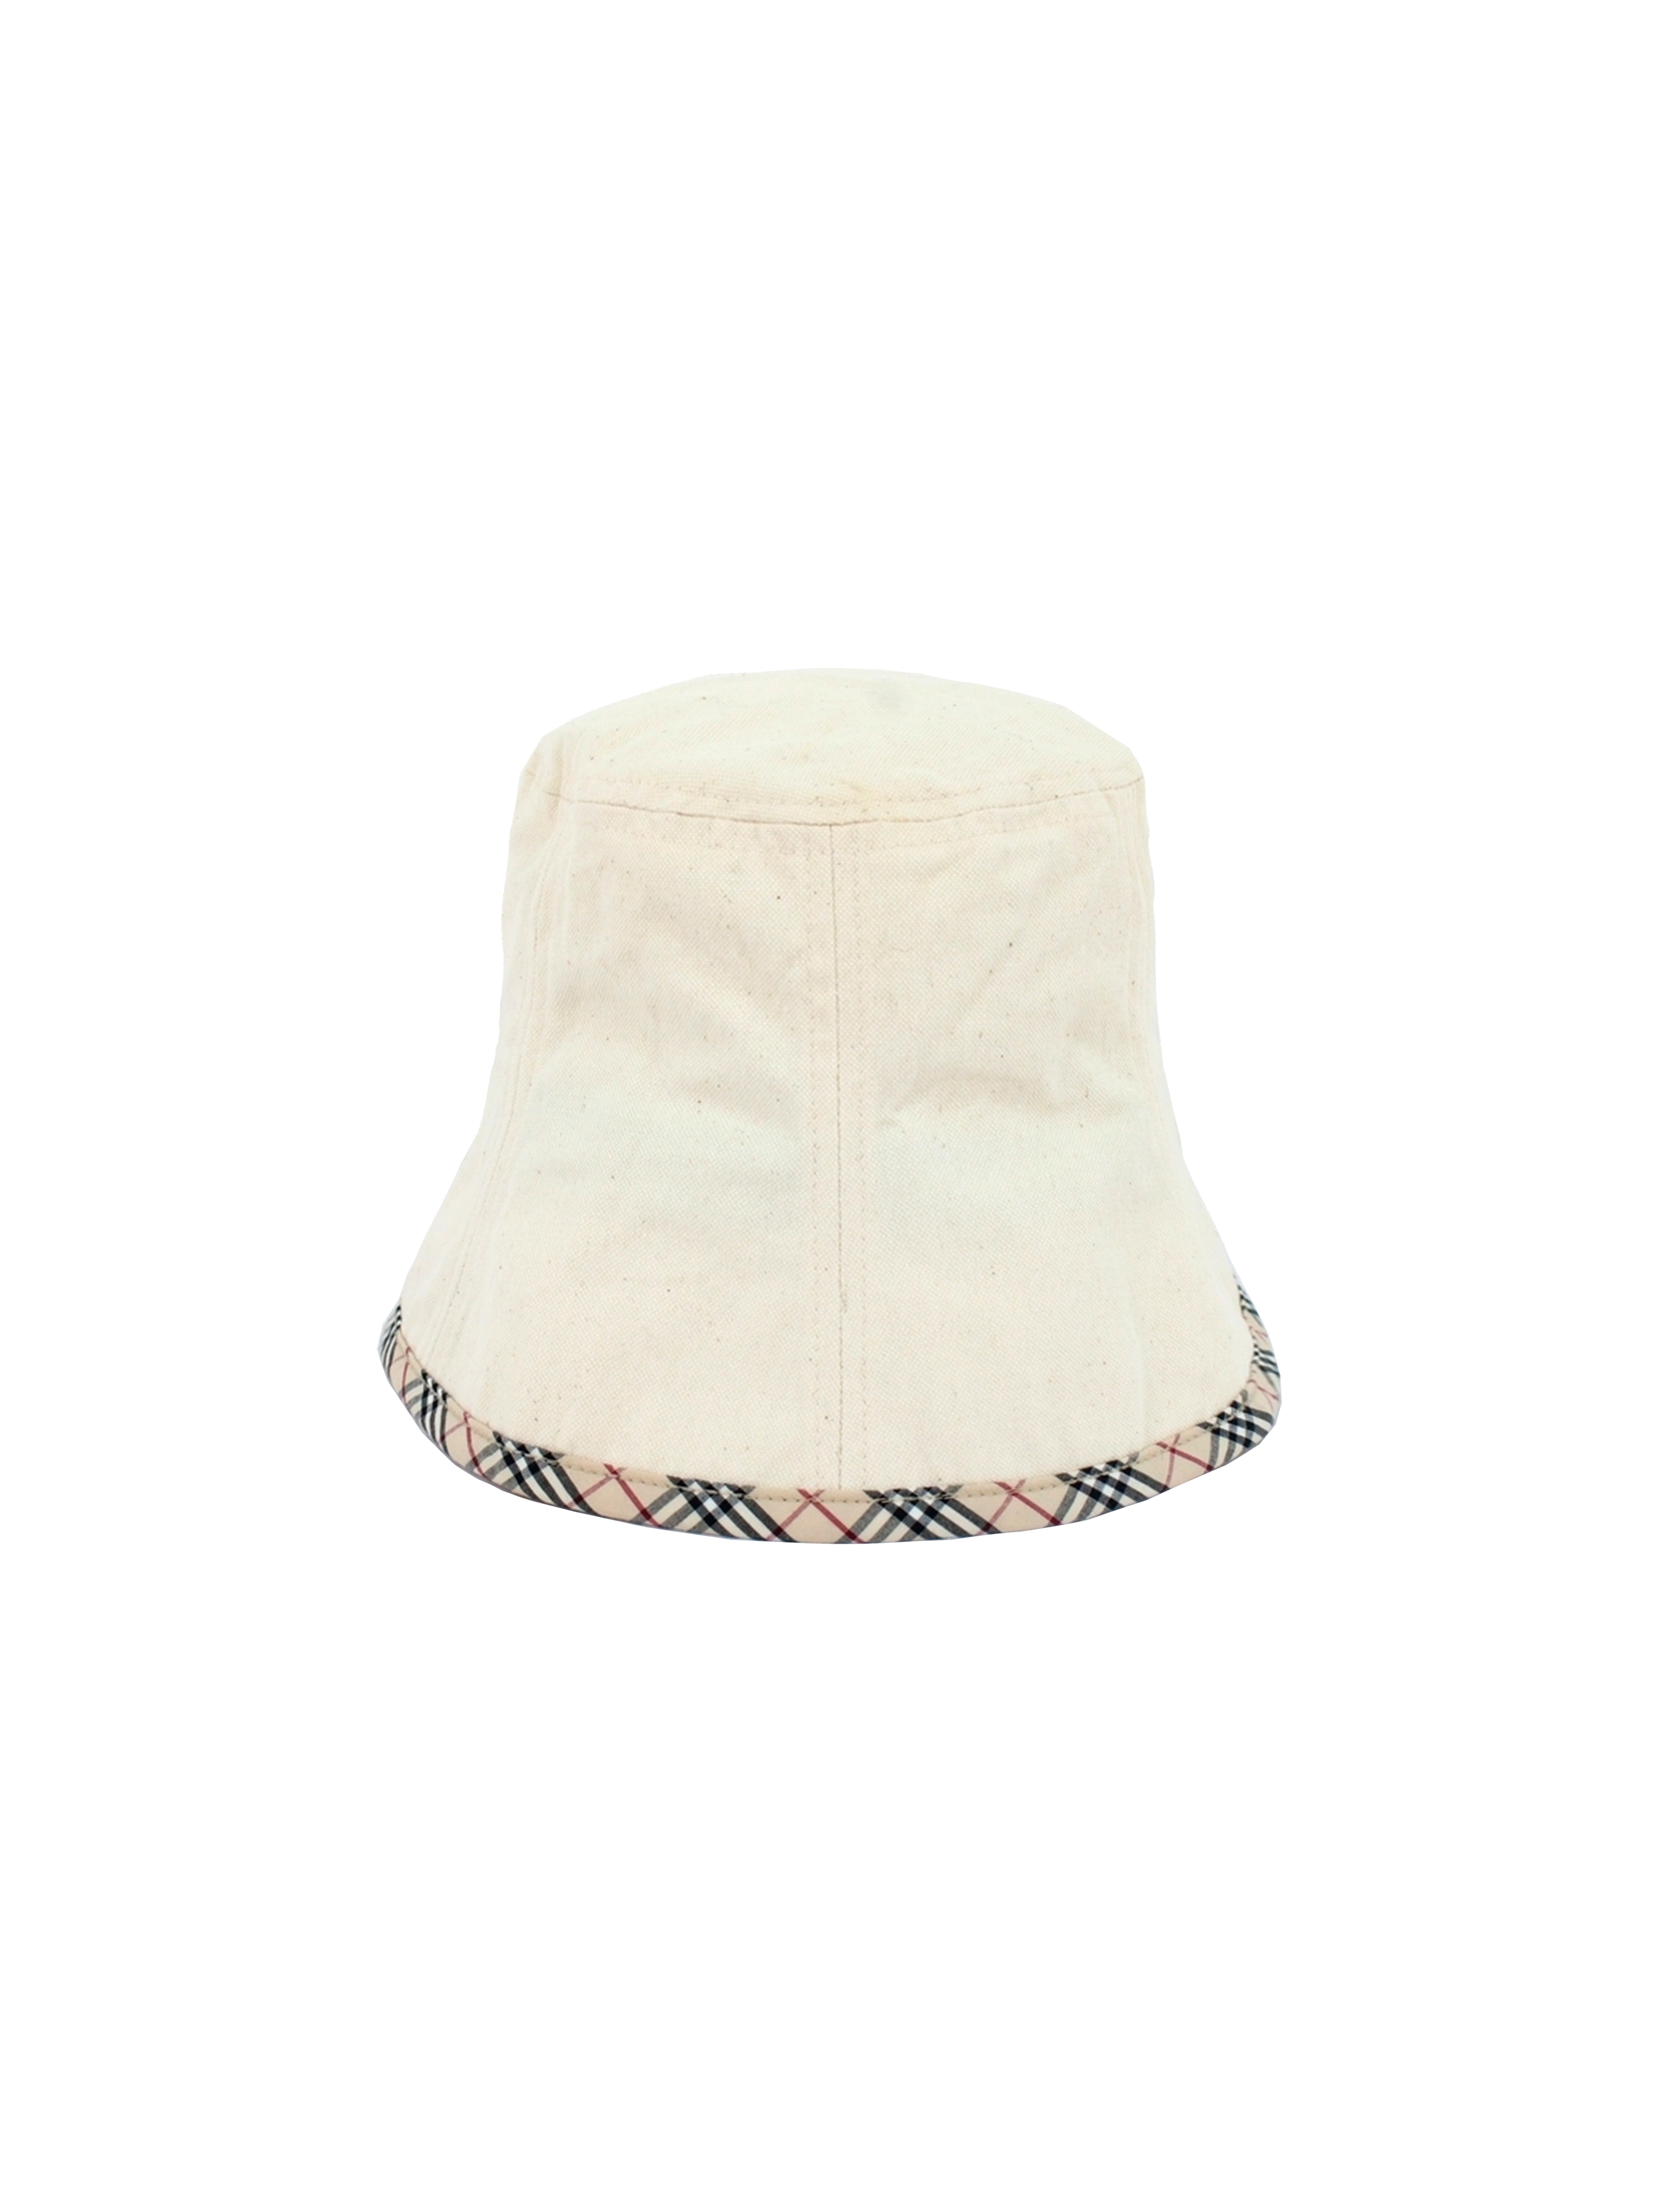 Burberry 2000s White Cotton Bucket Hat · INTO